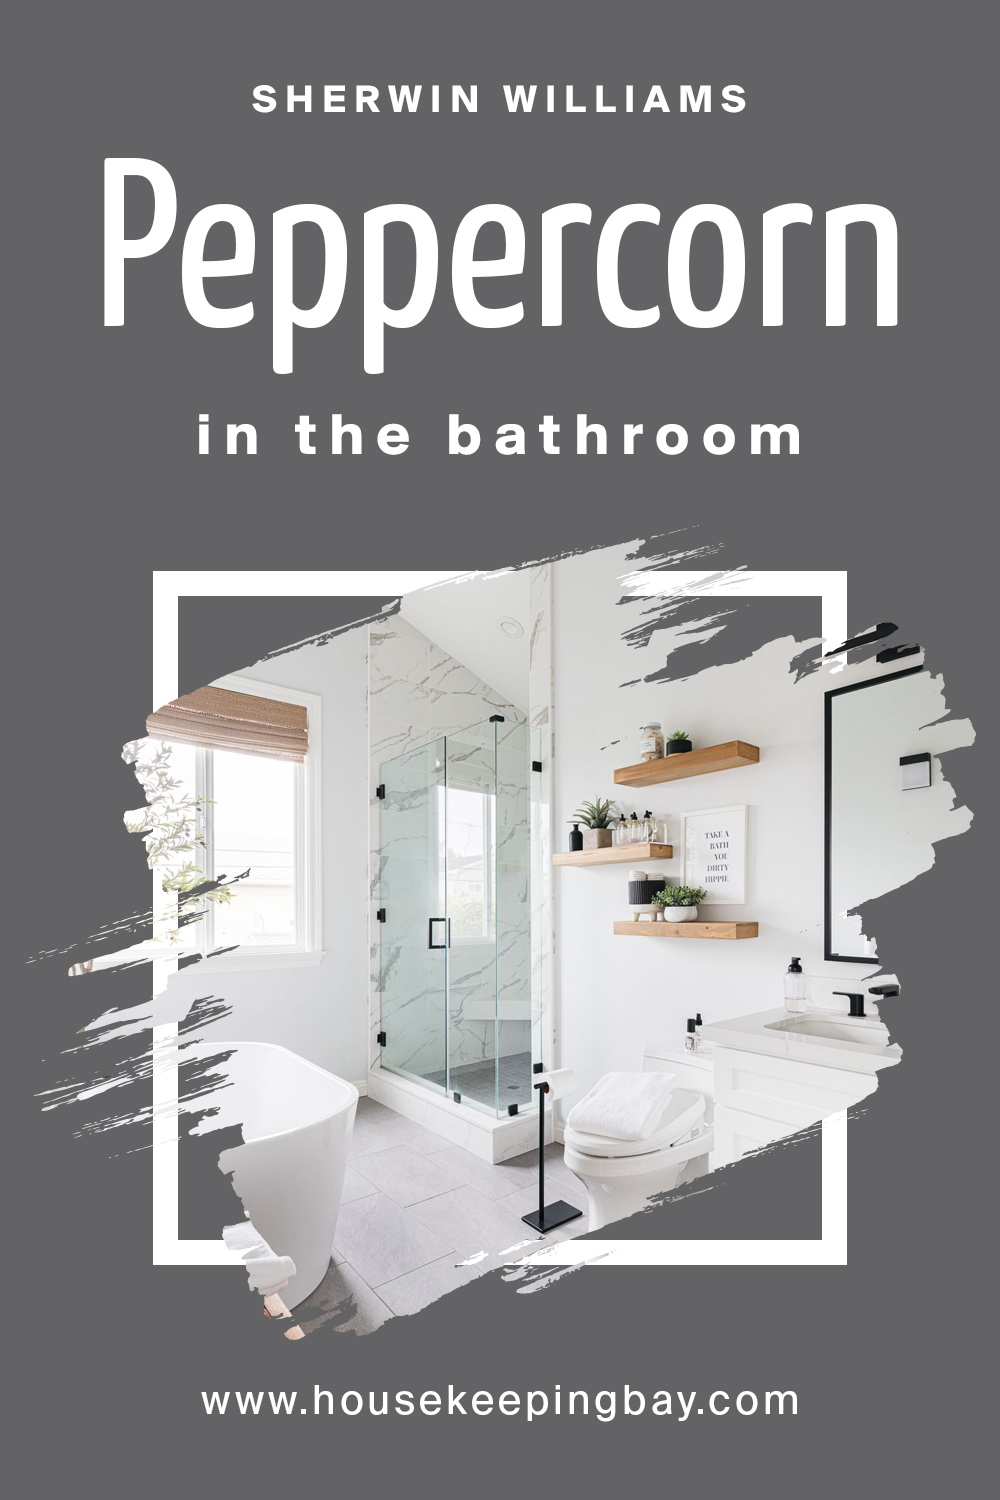 peppercorn by sherwin williams in the bathroom